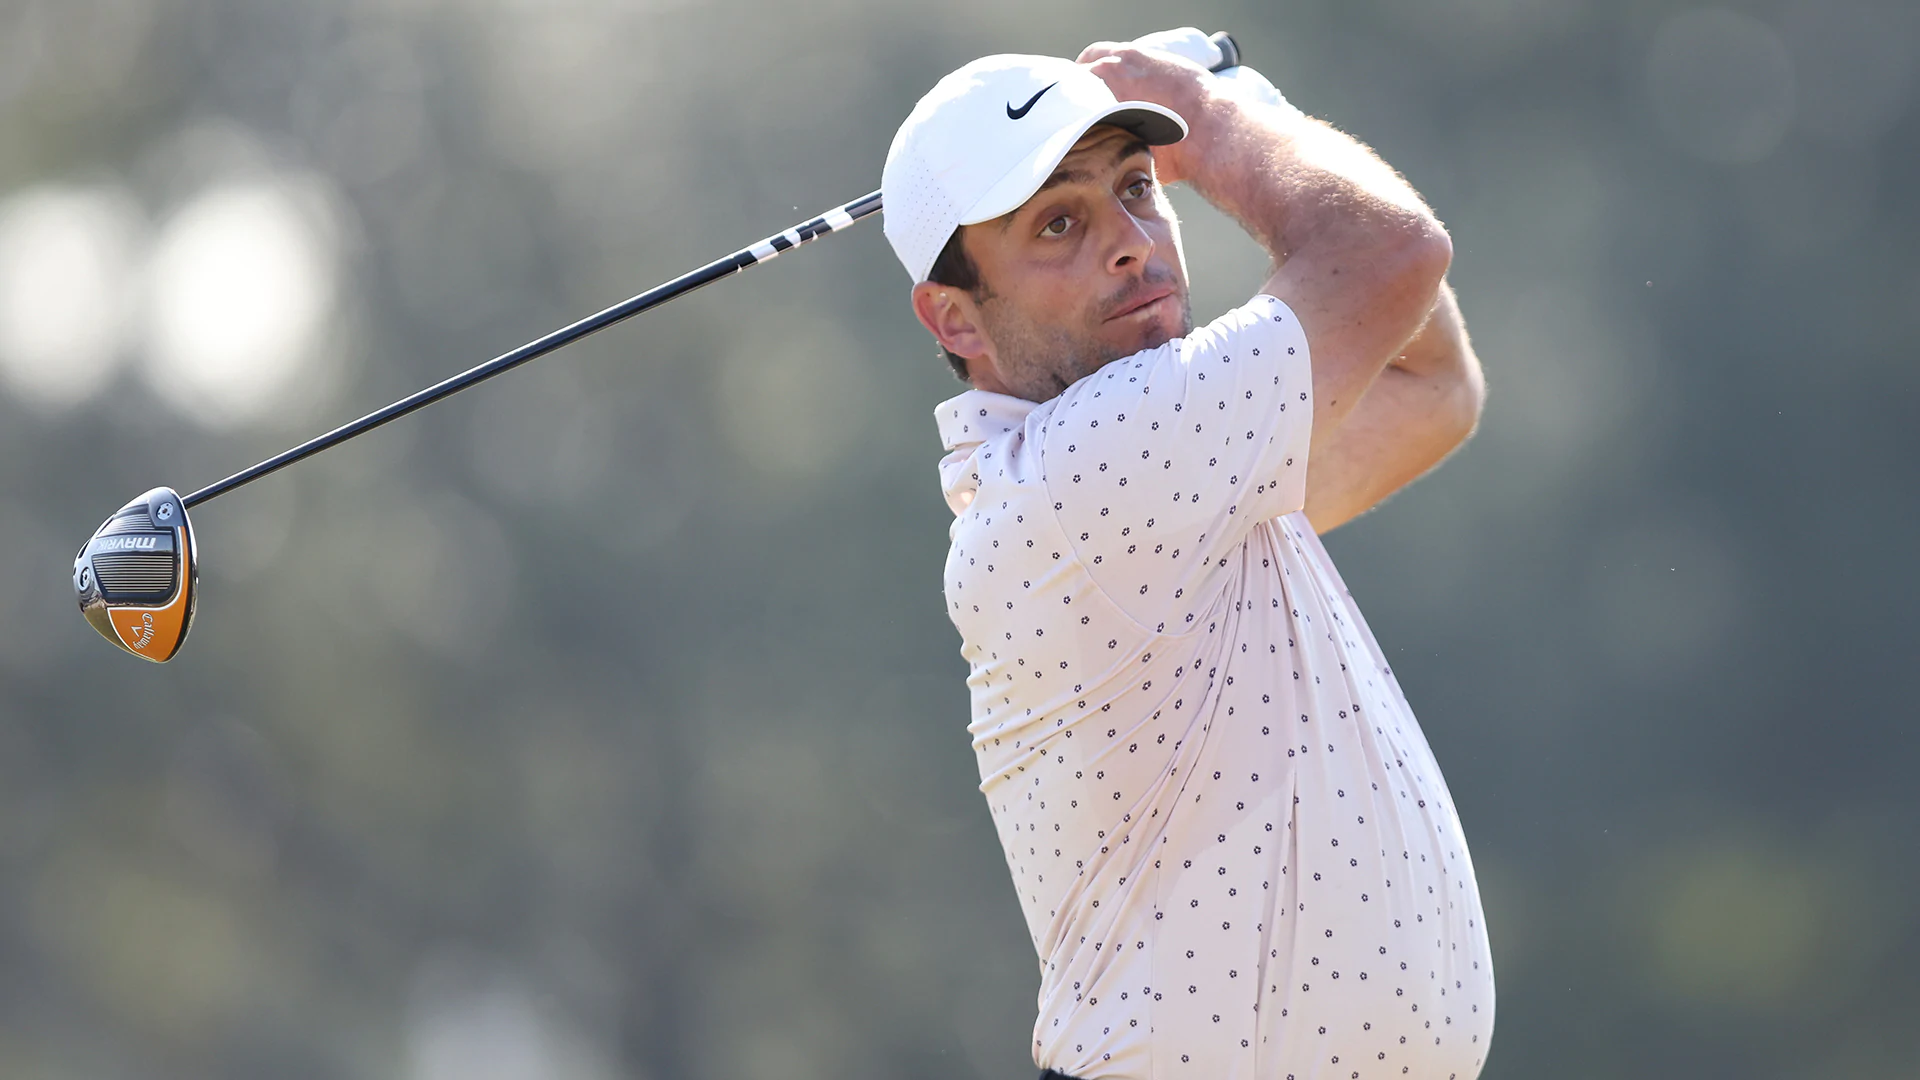 Francesco Molinari is in the top 10 at PGA West, much to his own amazement